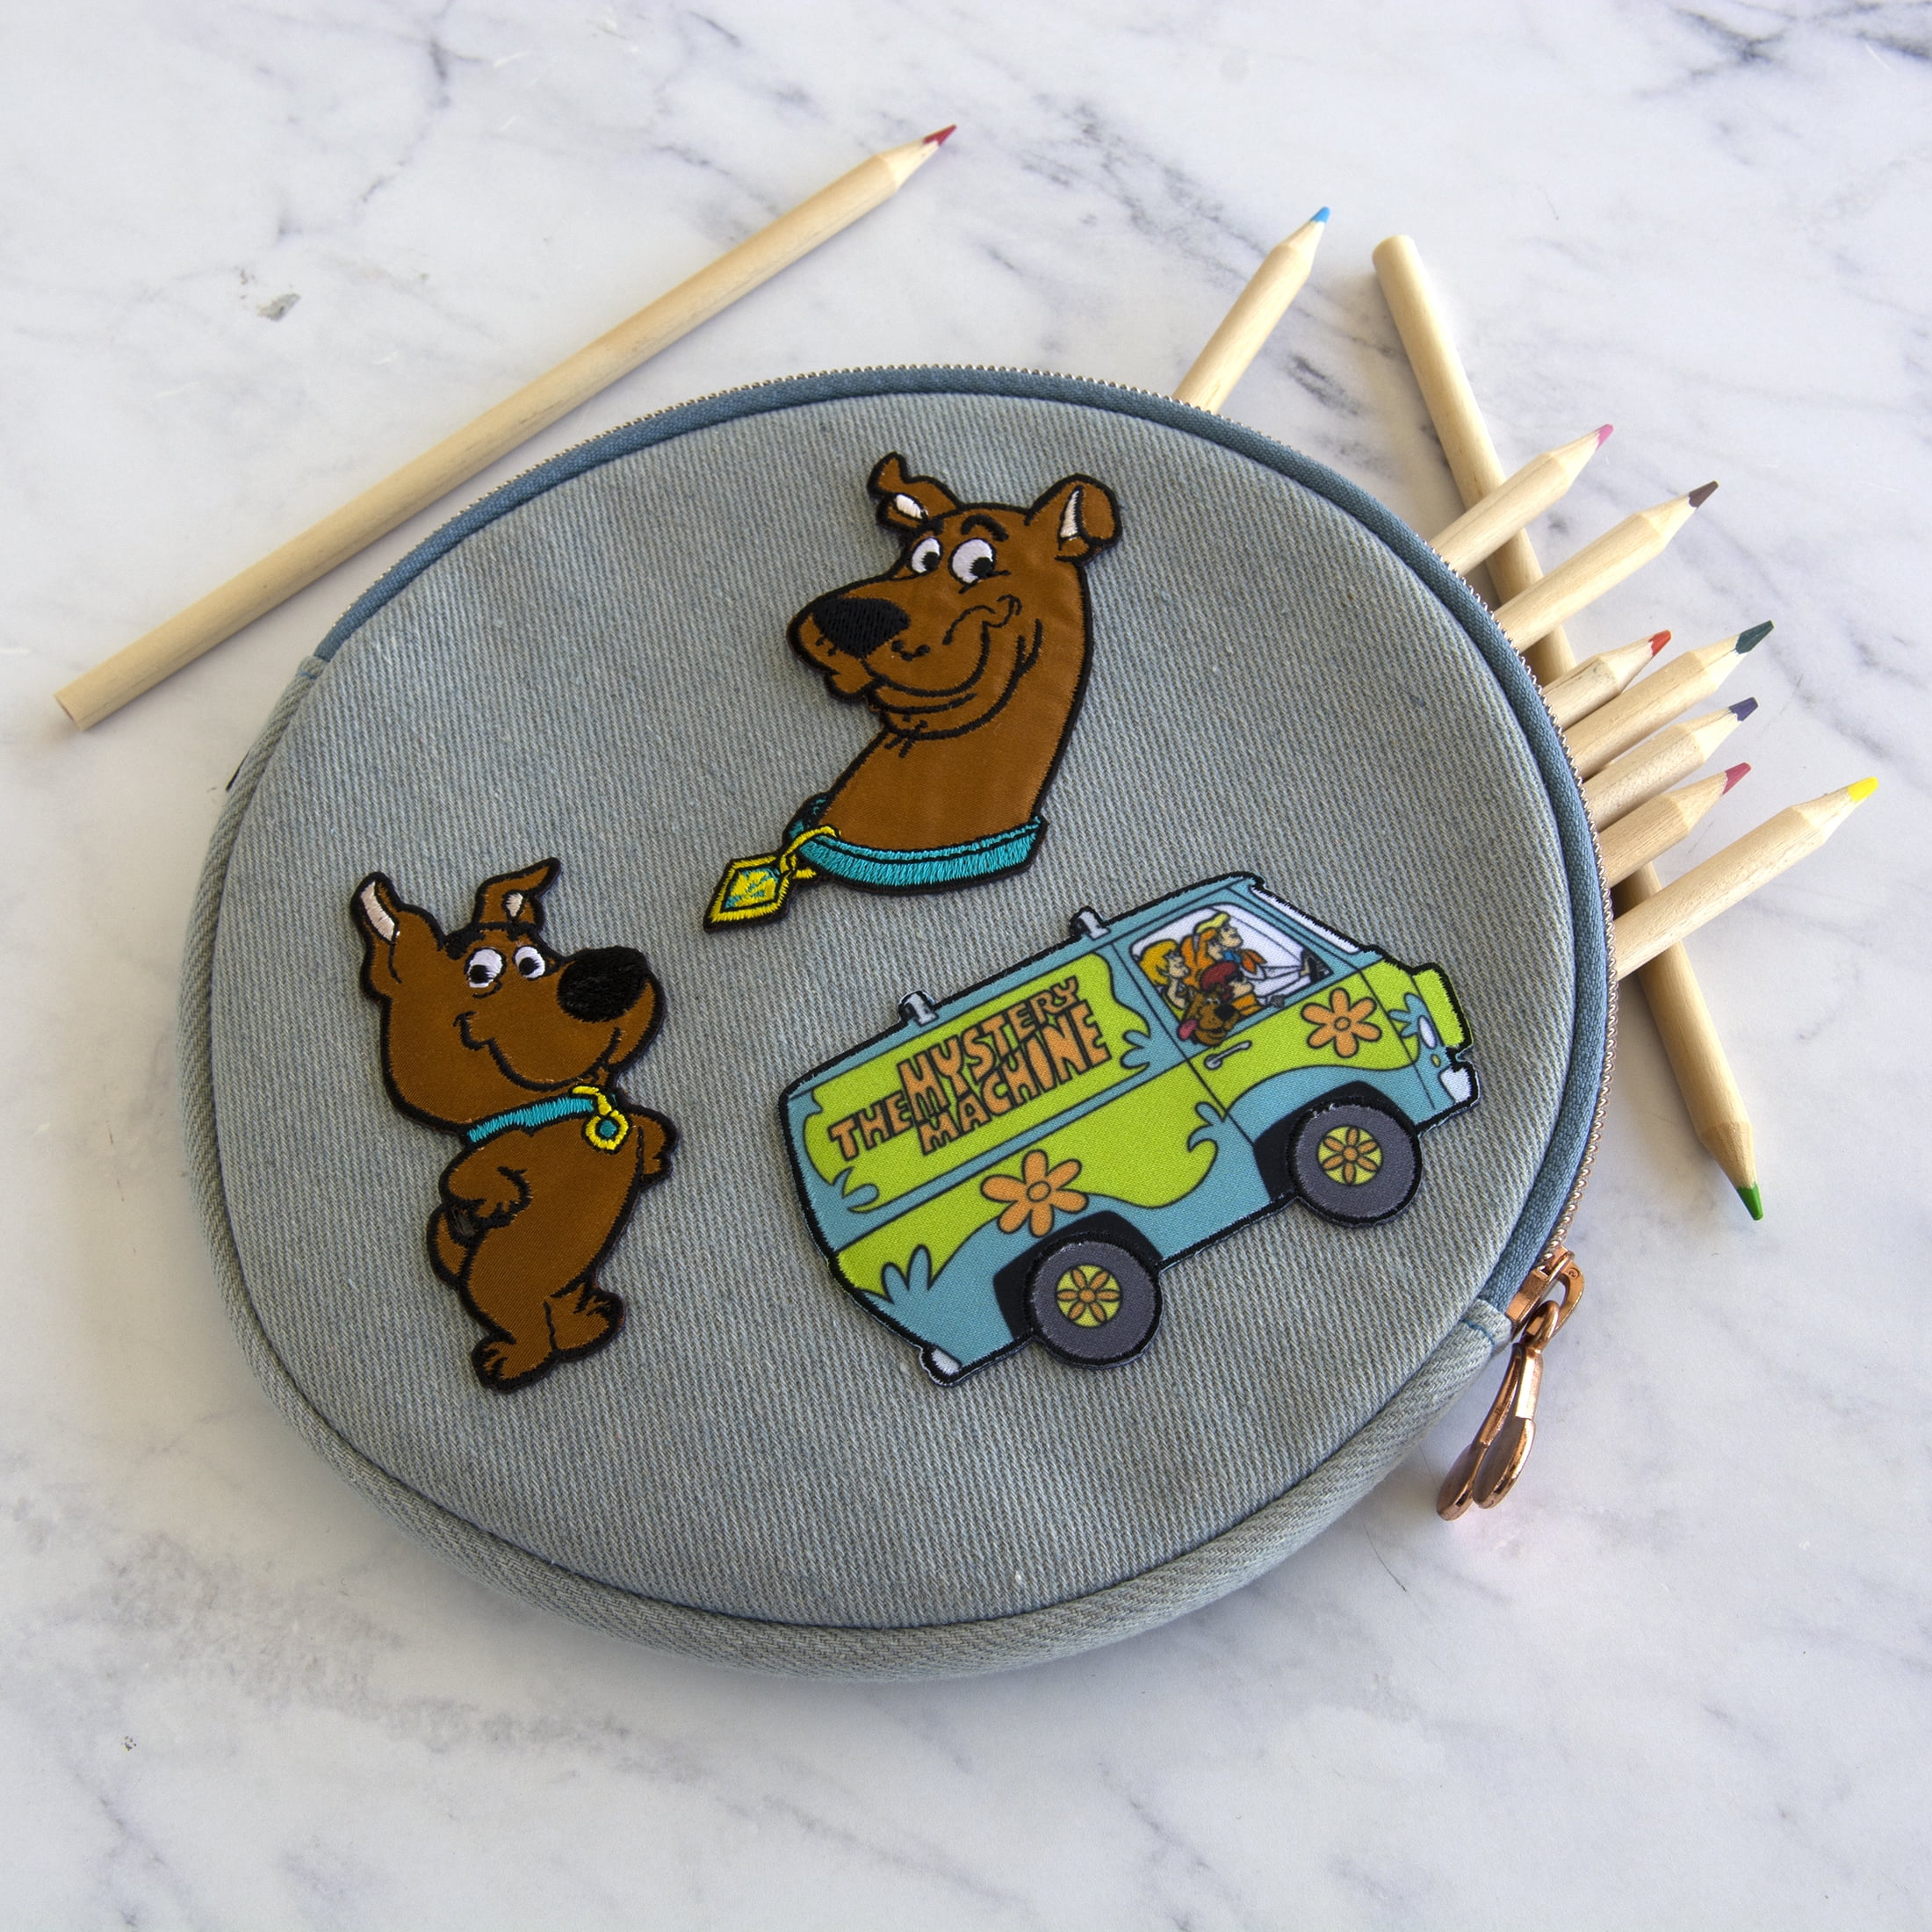 Simplicity Warner Bros. Scooby-Doo Iron-on Applique Embroidered Patch,  Multi-color, 1 Each 